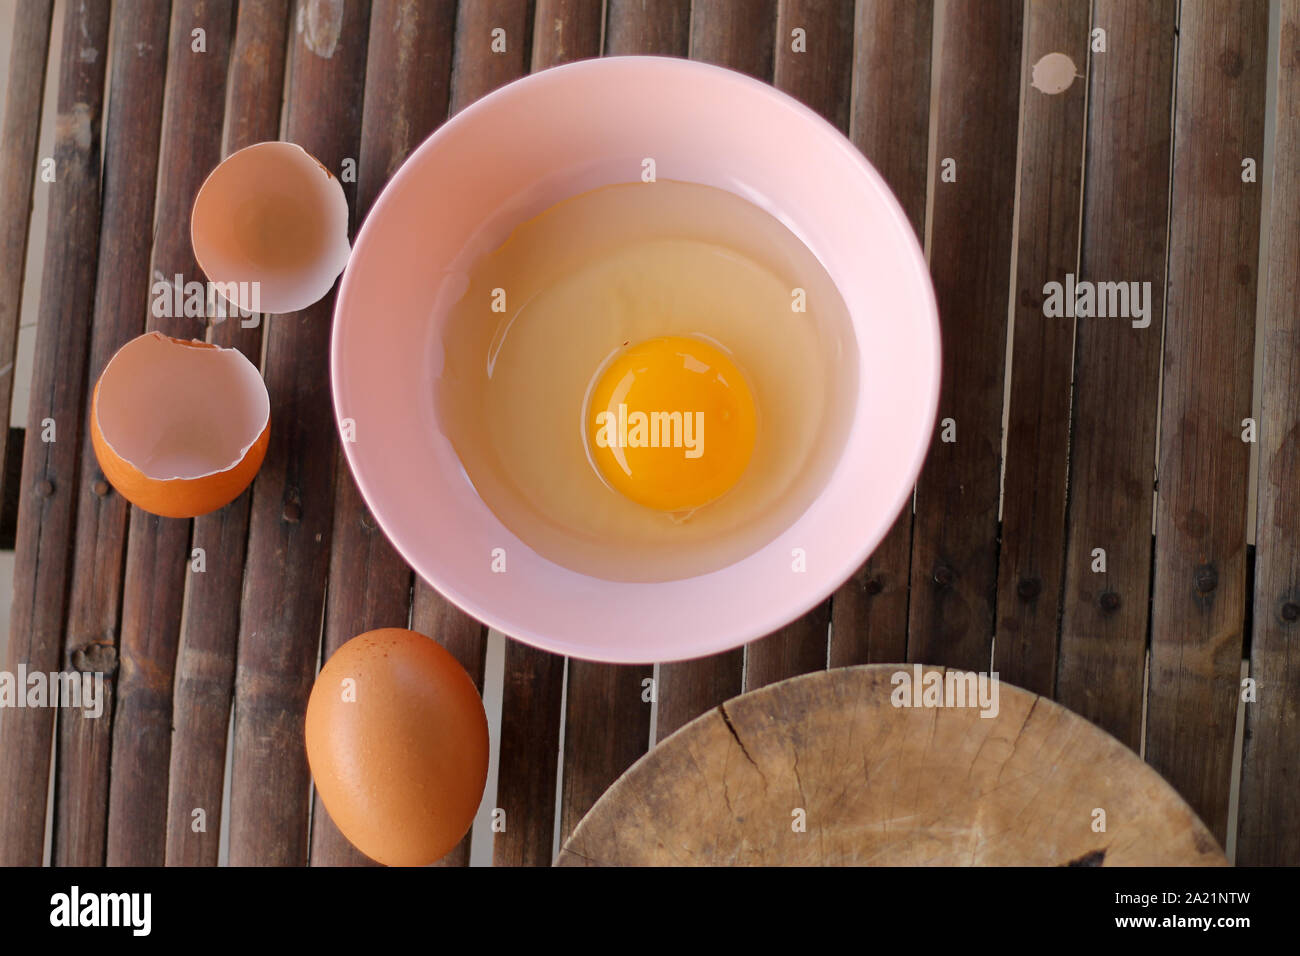 shell with egg and open Eggs in a pink bowl Placed near to the butcher on Bamboo battens.Top view closeup. Stock Photo